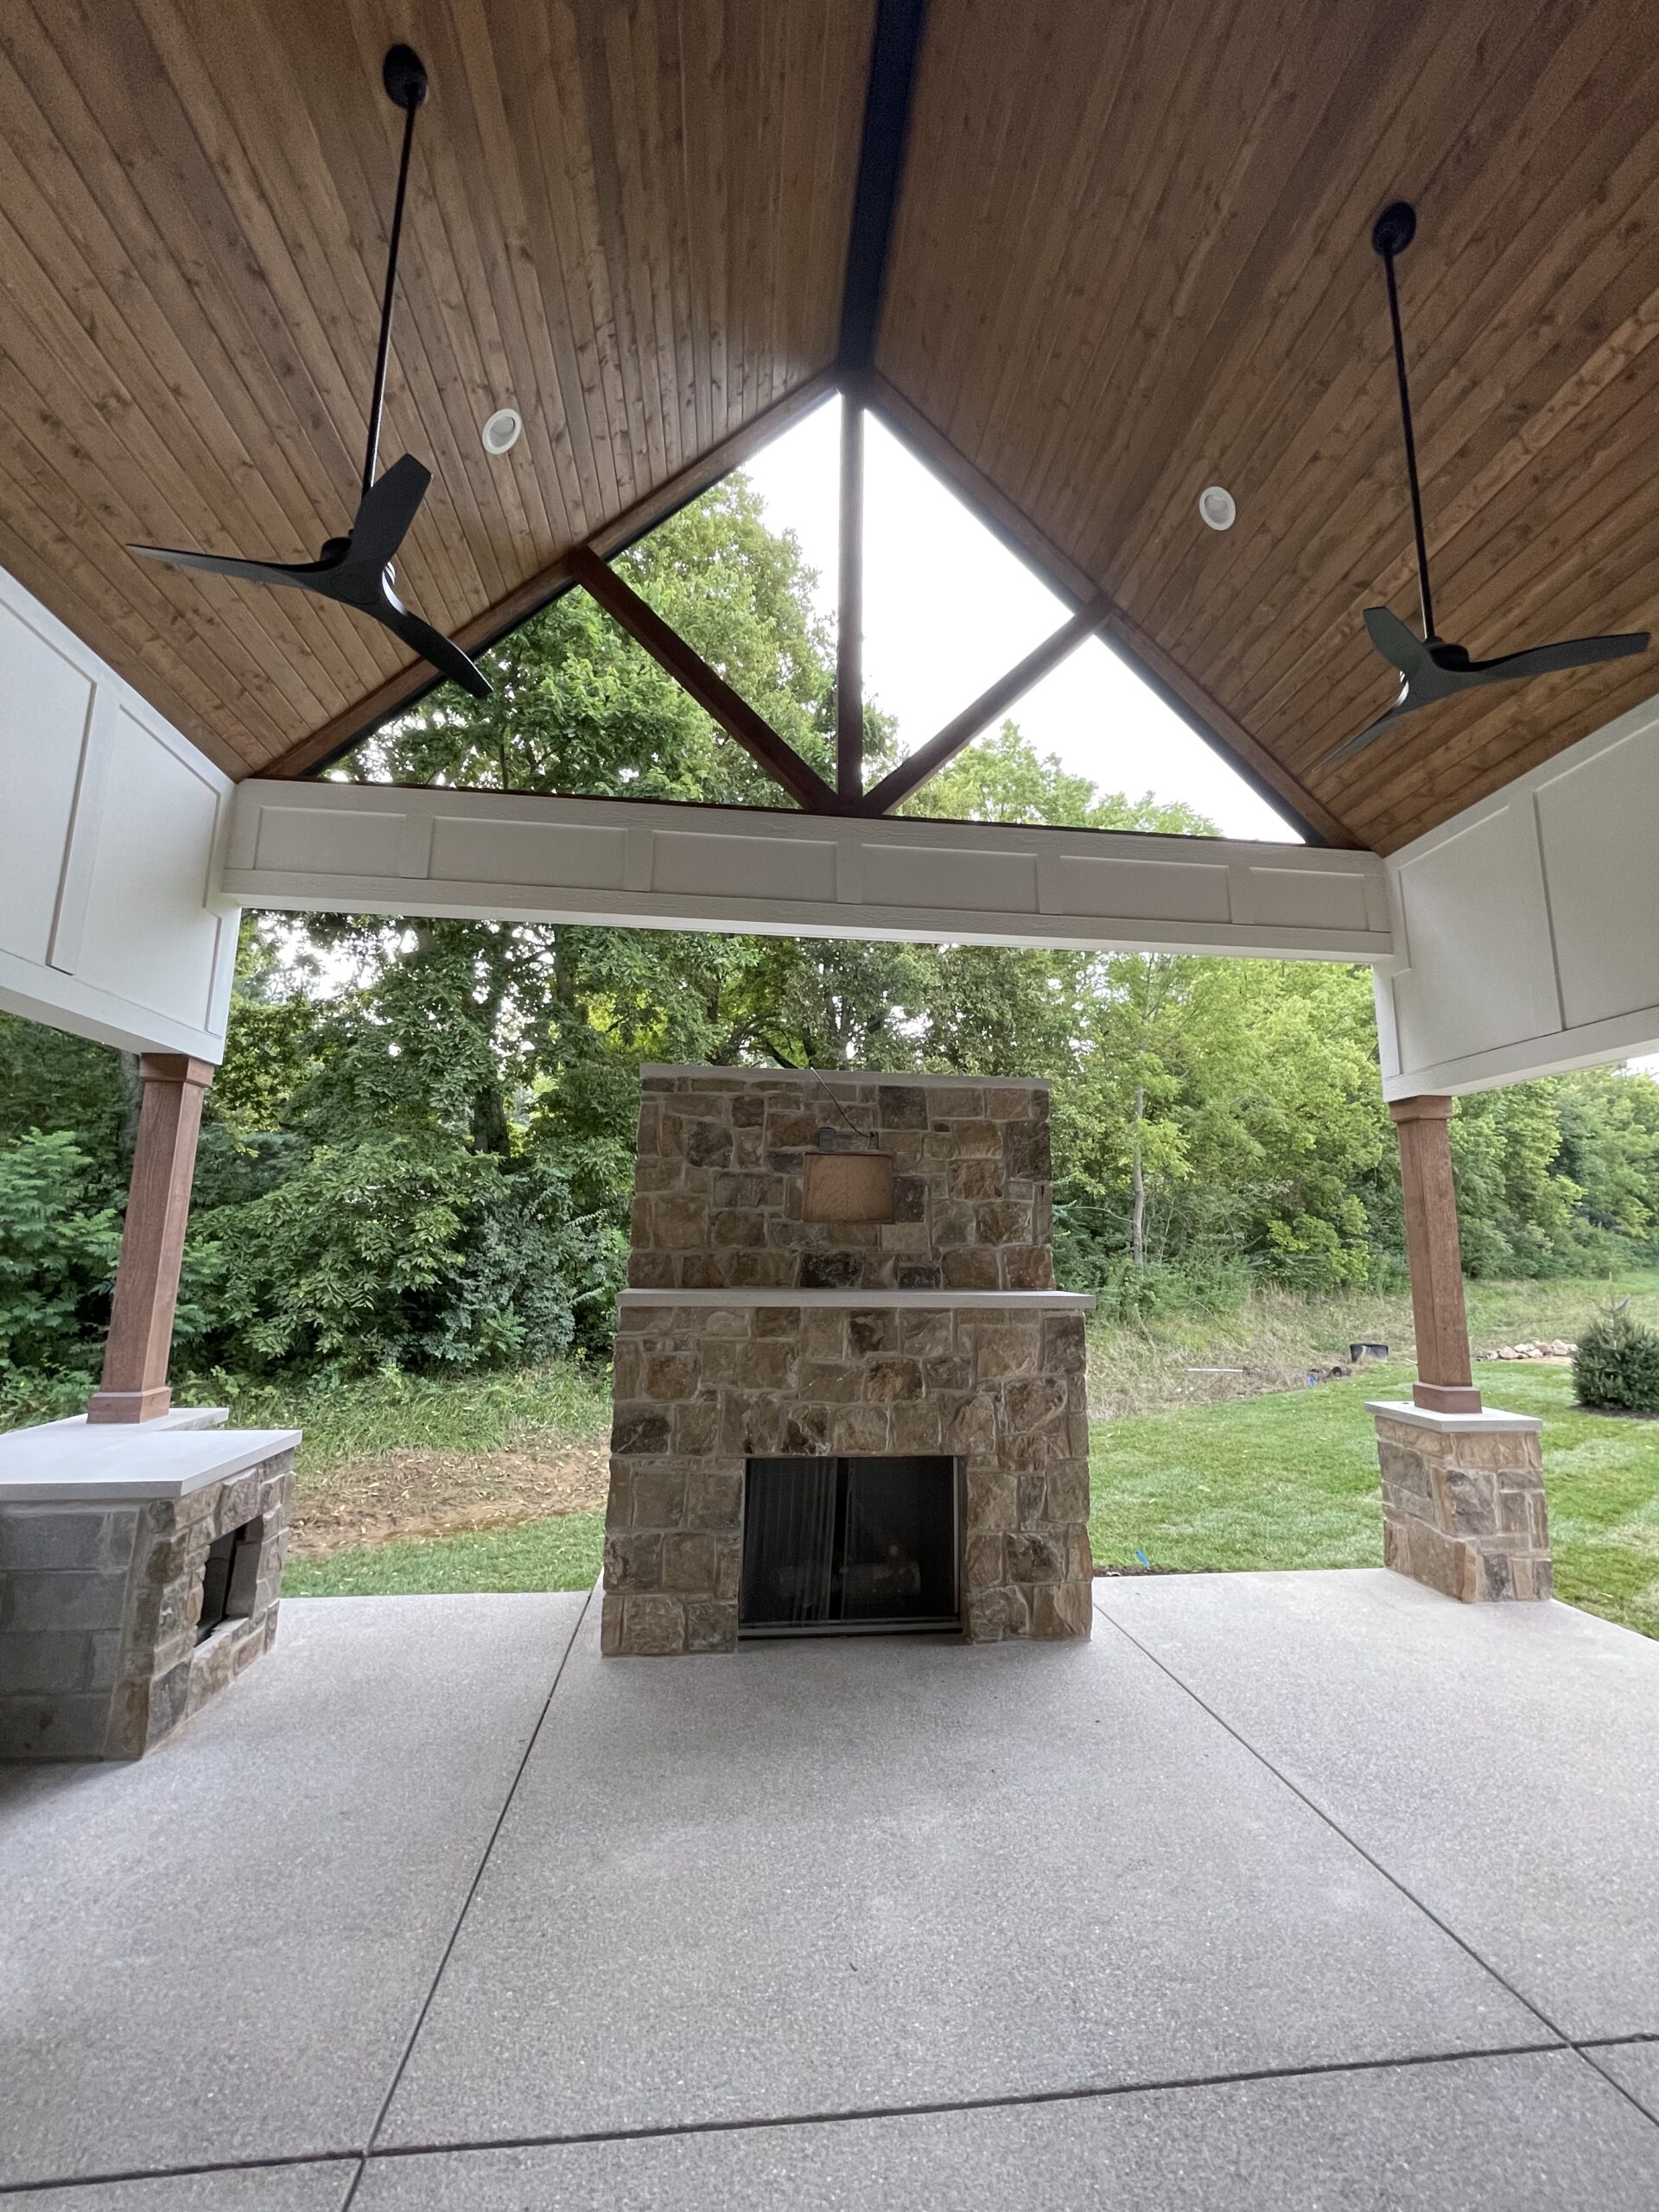 Wood accent on ceiling of outdoor patio